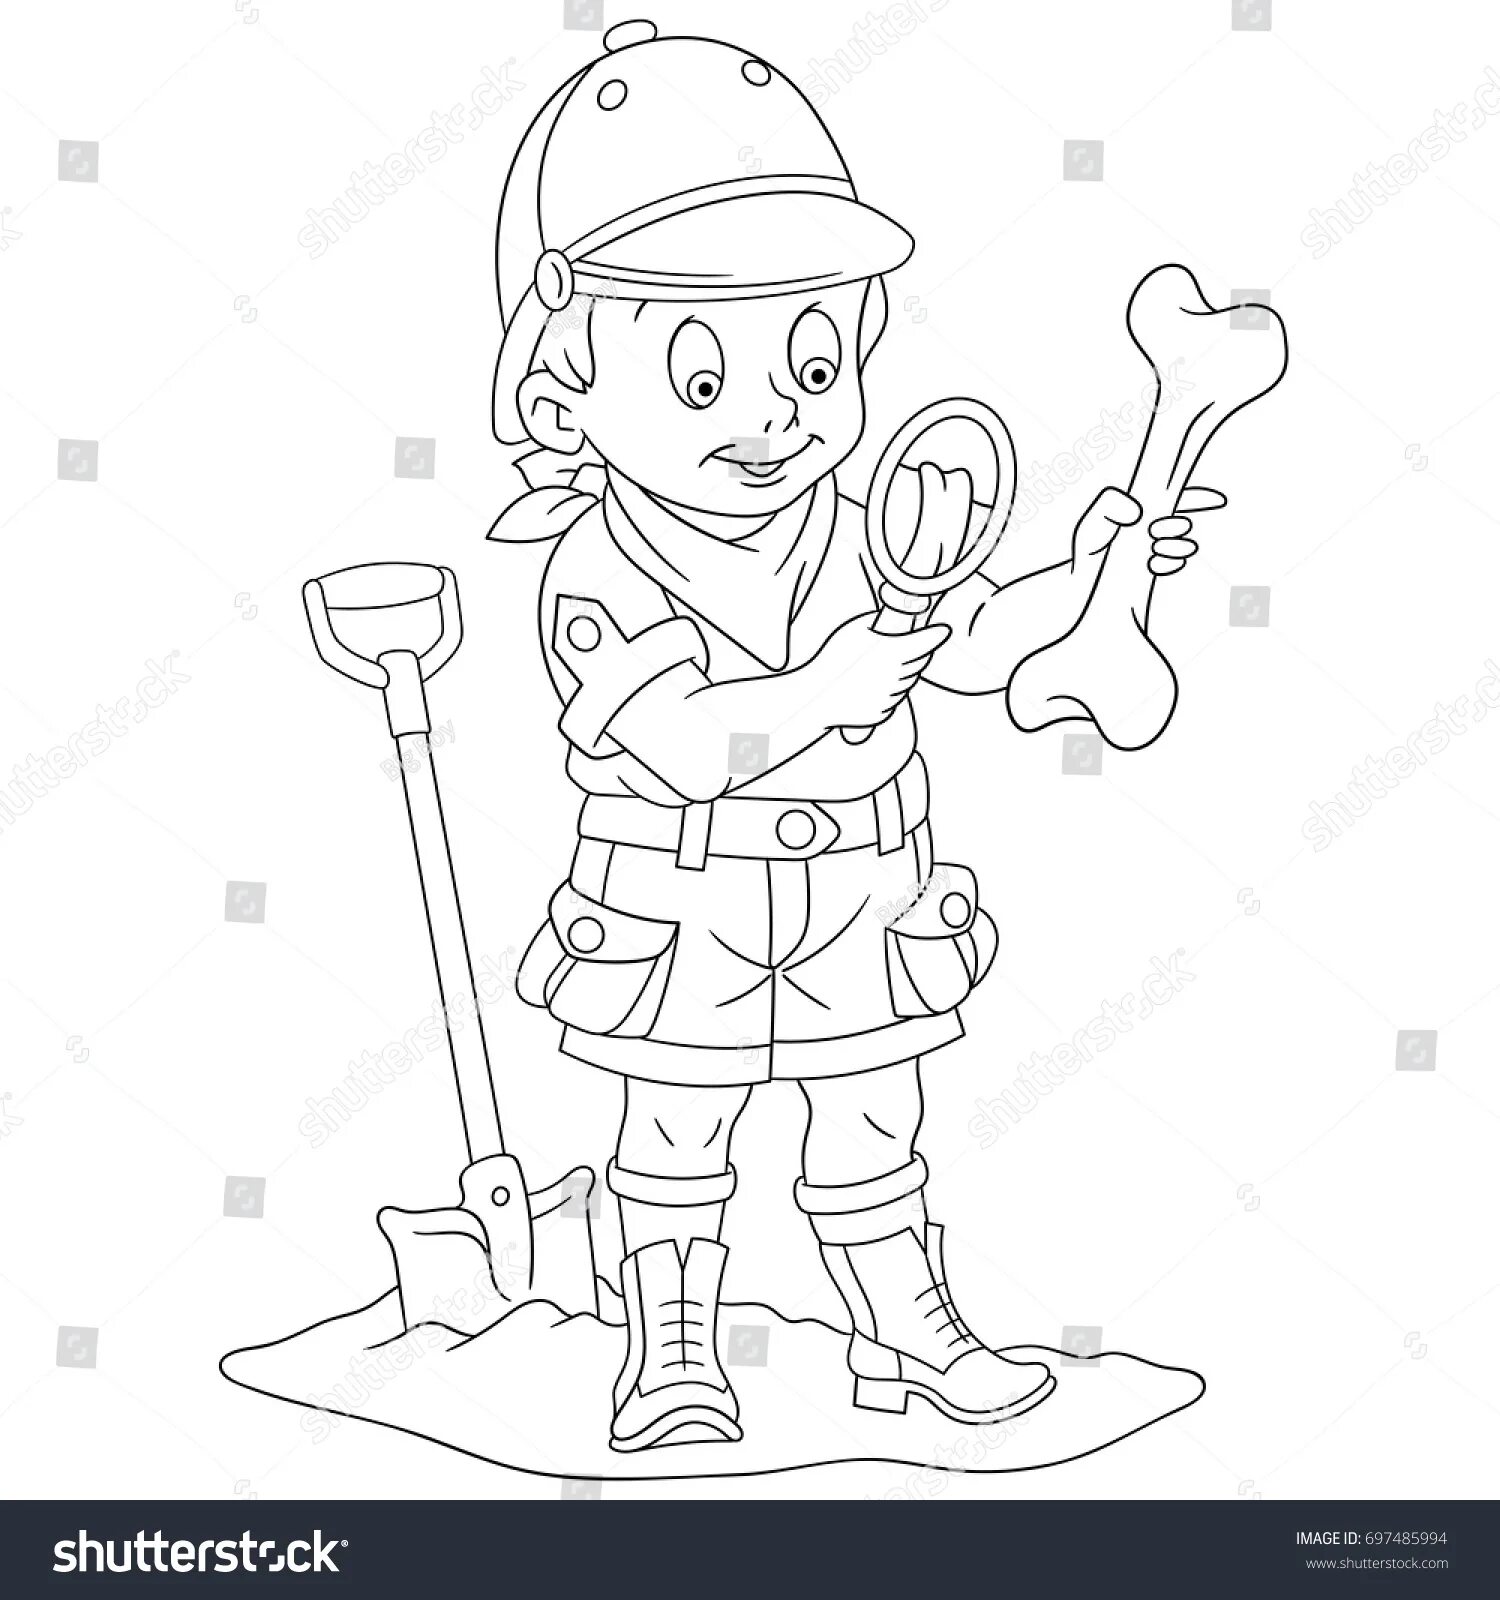 Glorious archaeologist coloring page